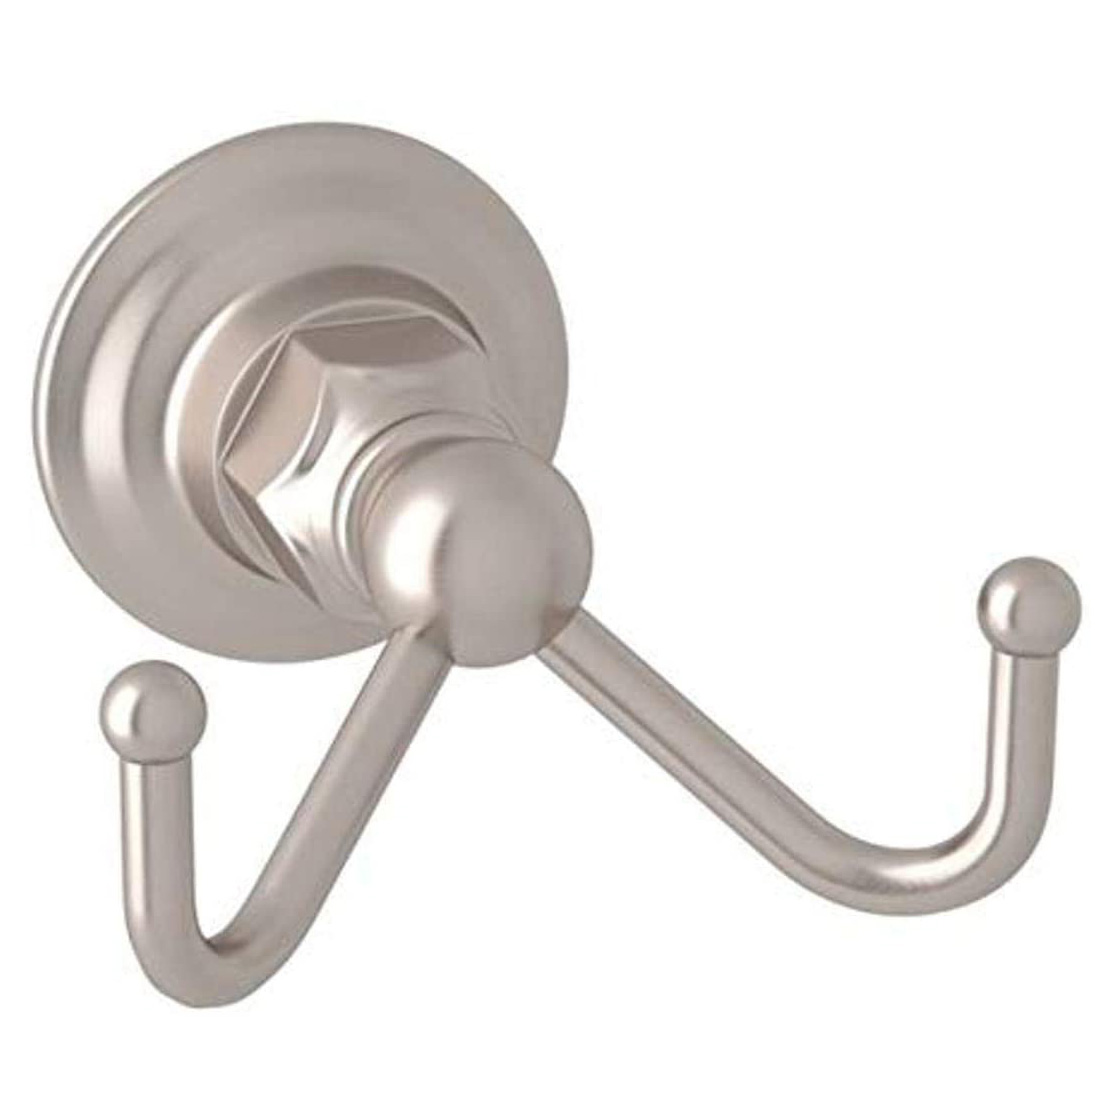 Country Bath Double Robe Hook in Satin Nickel